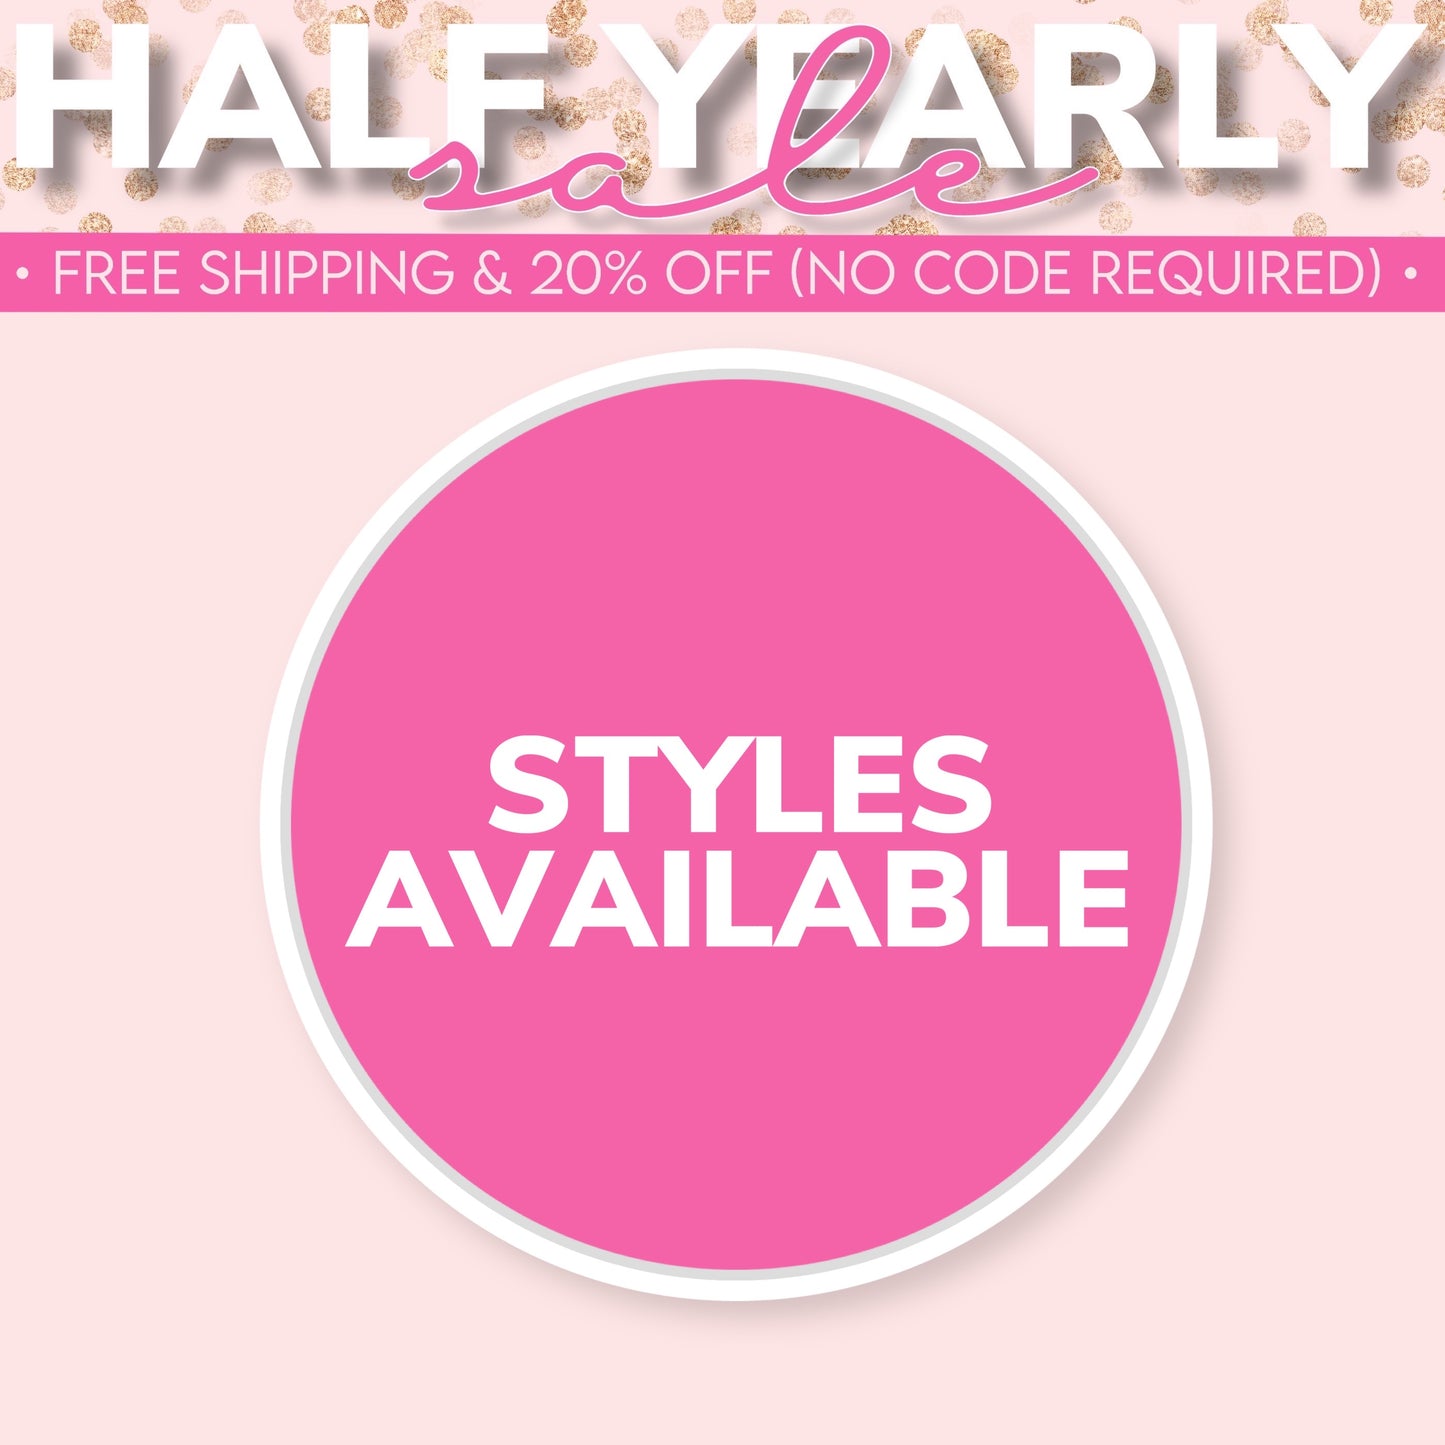 STYLES AVAILABLE